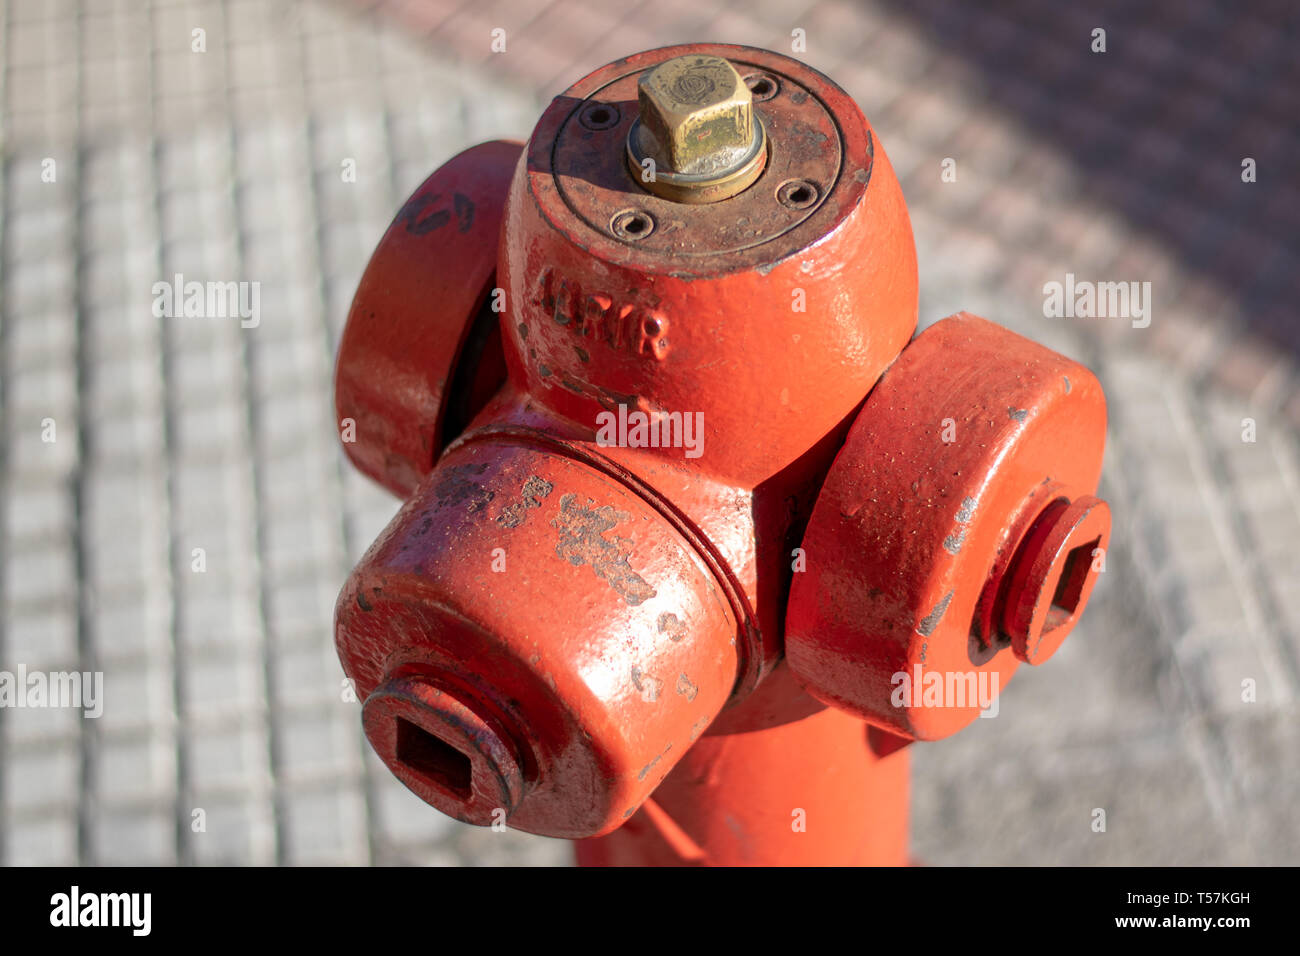 Hydrant on the sidewalk whith the word “abrir” that means open in spanish. Europe. Closeup. Stock Photo